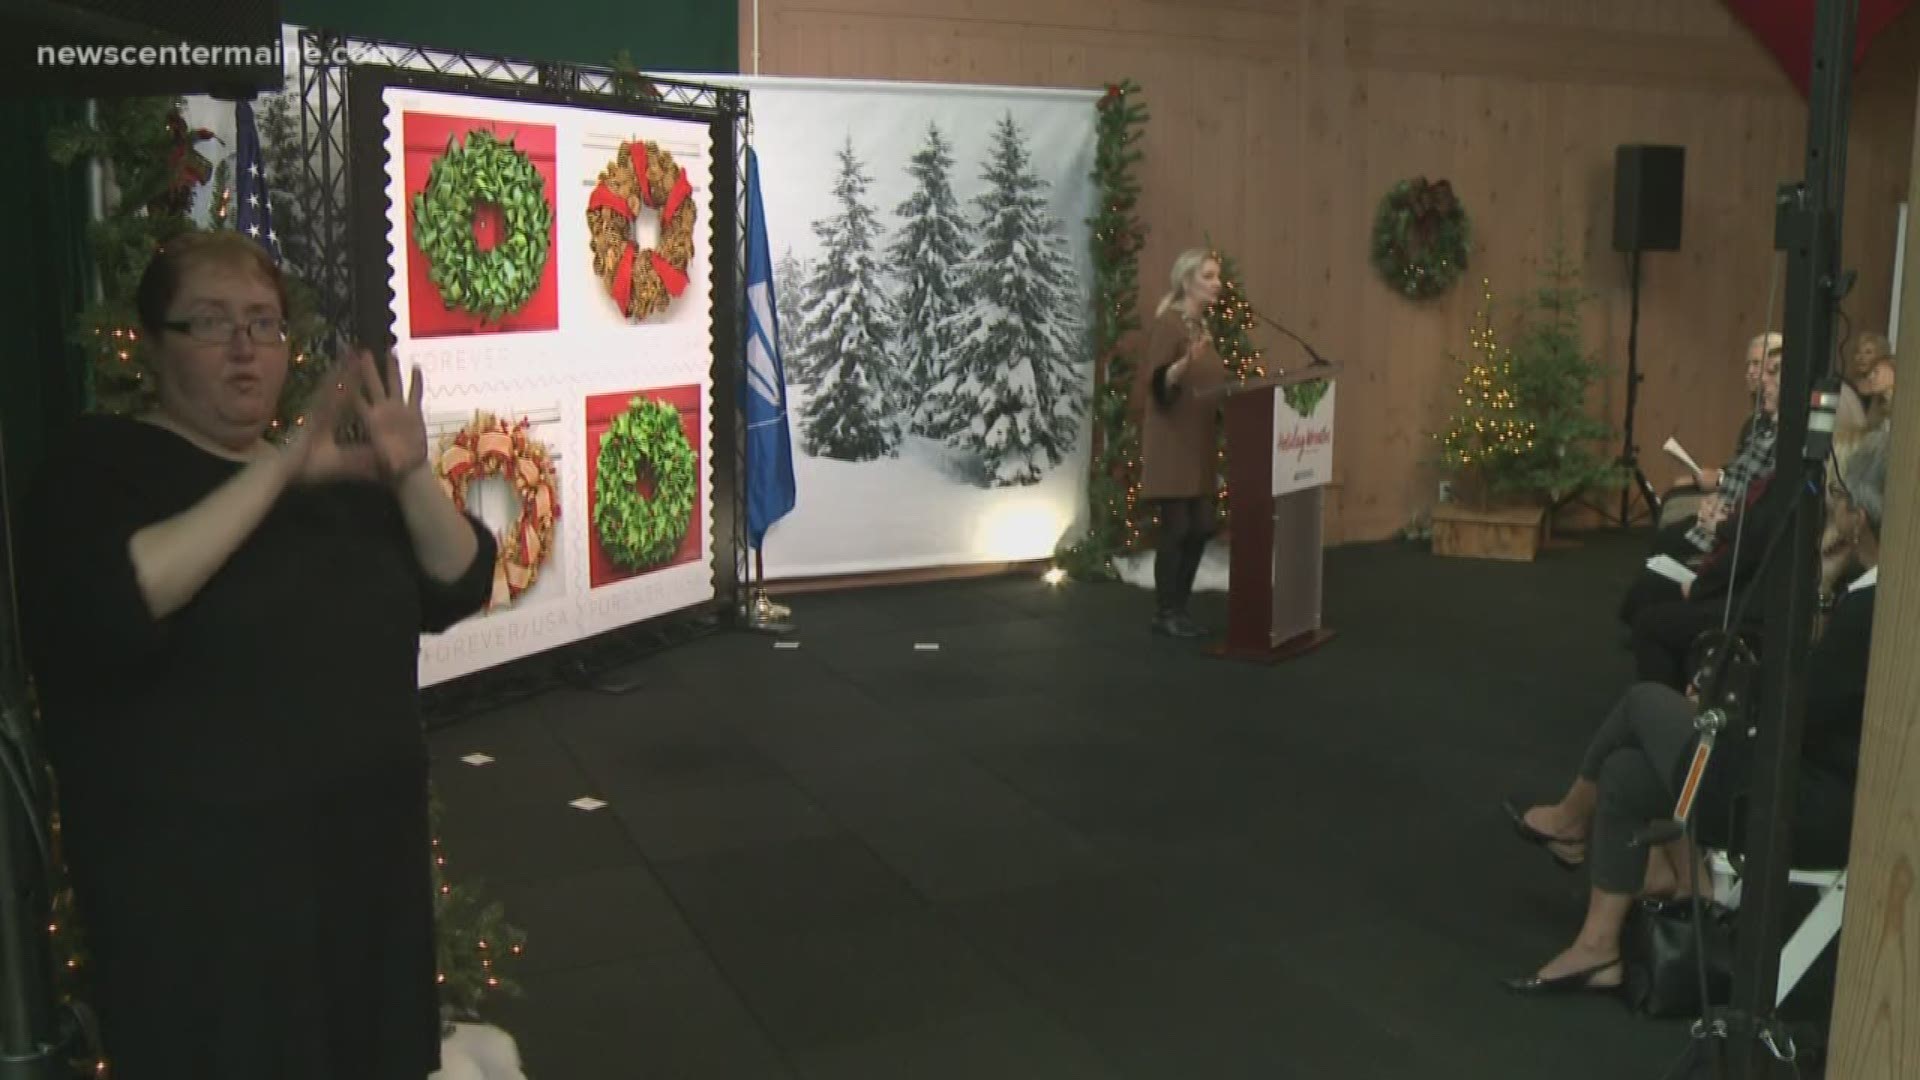 A ceremony to unveil a new set of holiday stamps made L.L. Bean an island of Christmas cheer while the rest of Freeport was still focused on Halloween last Friday.